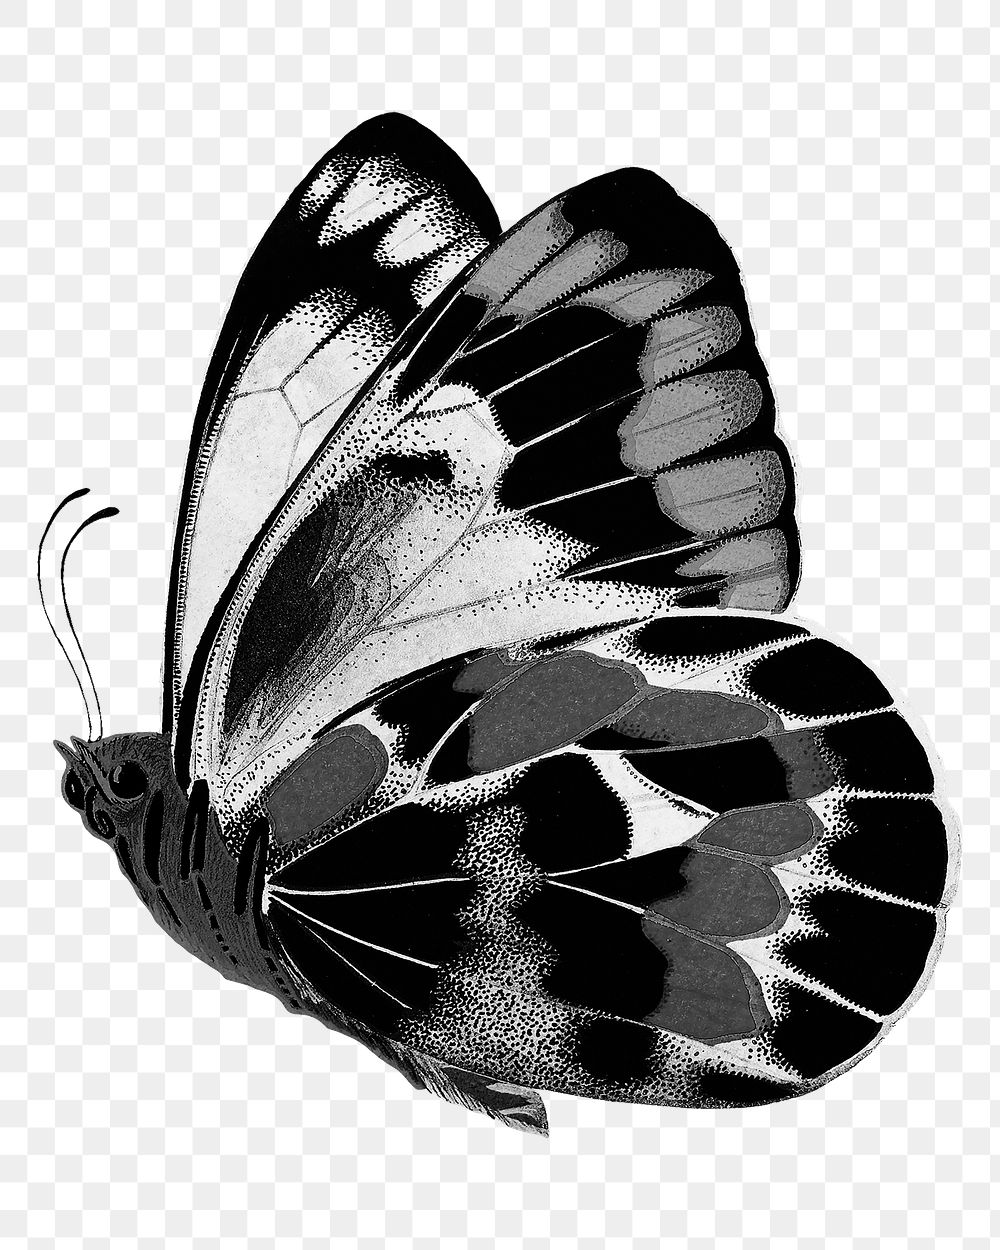 Black butterfly png, transparent background